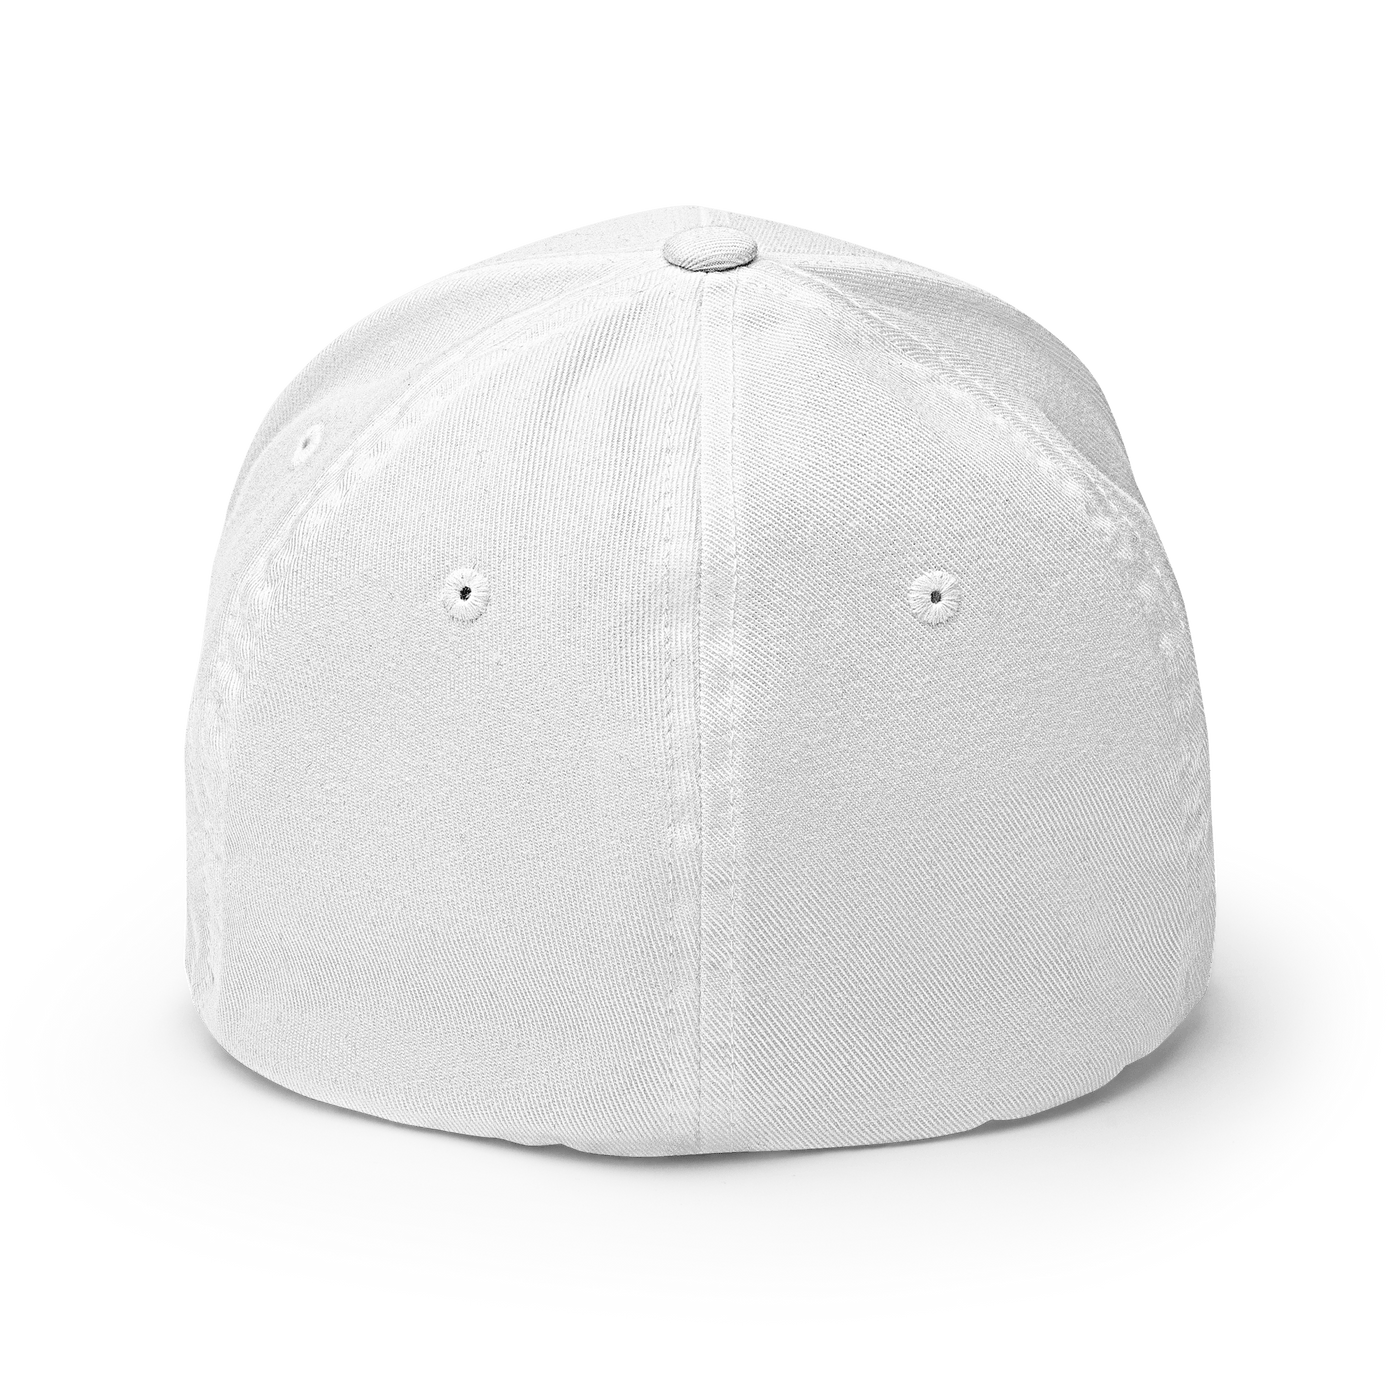 FAKE Flexfit Cap - White - S/M - Just Another Cap Store